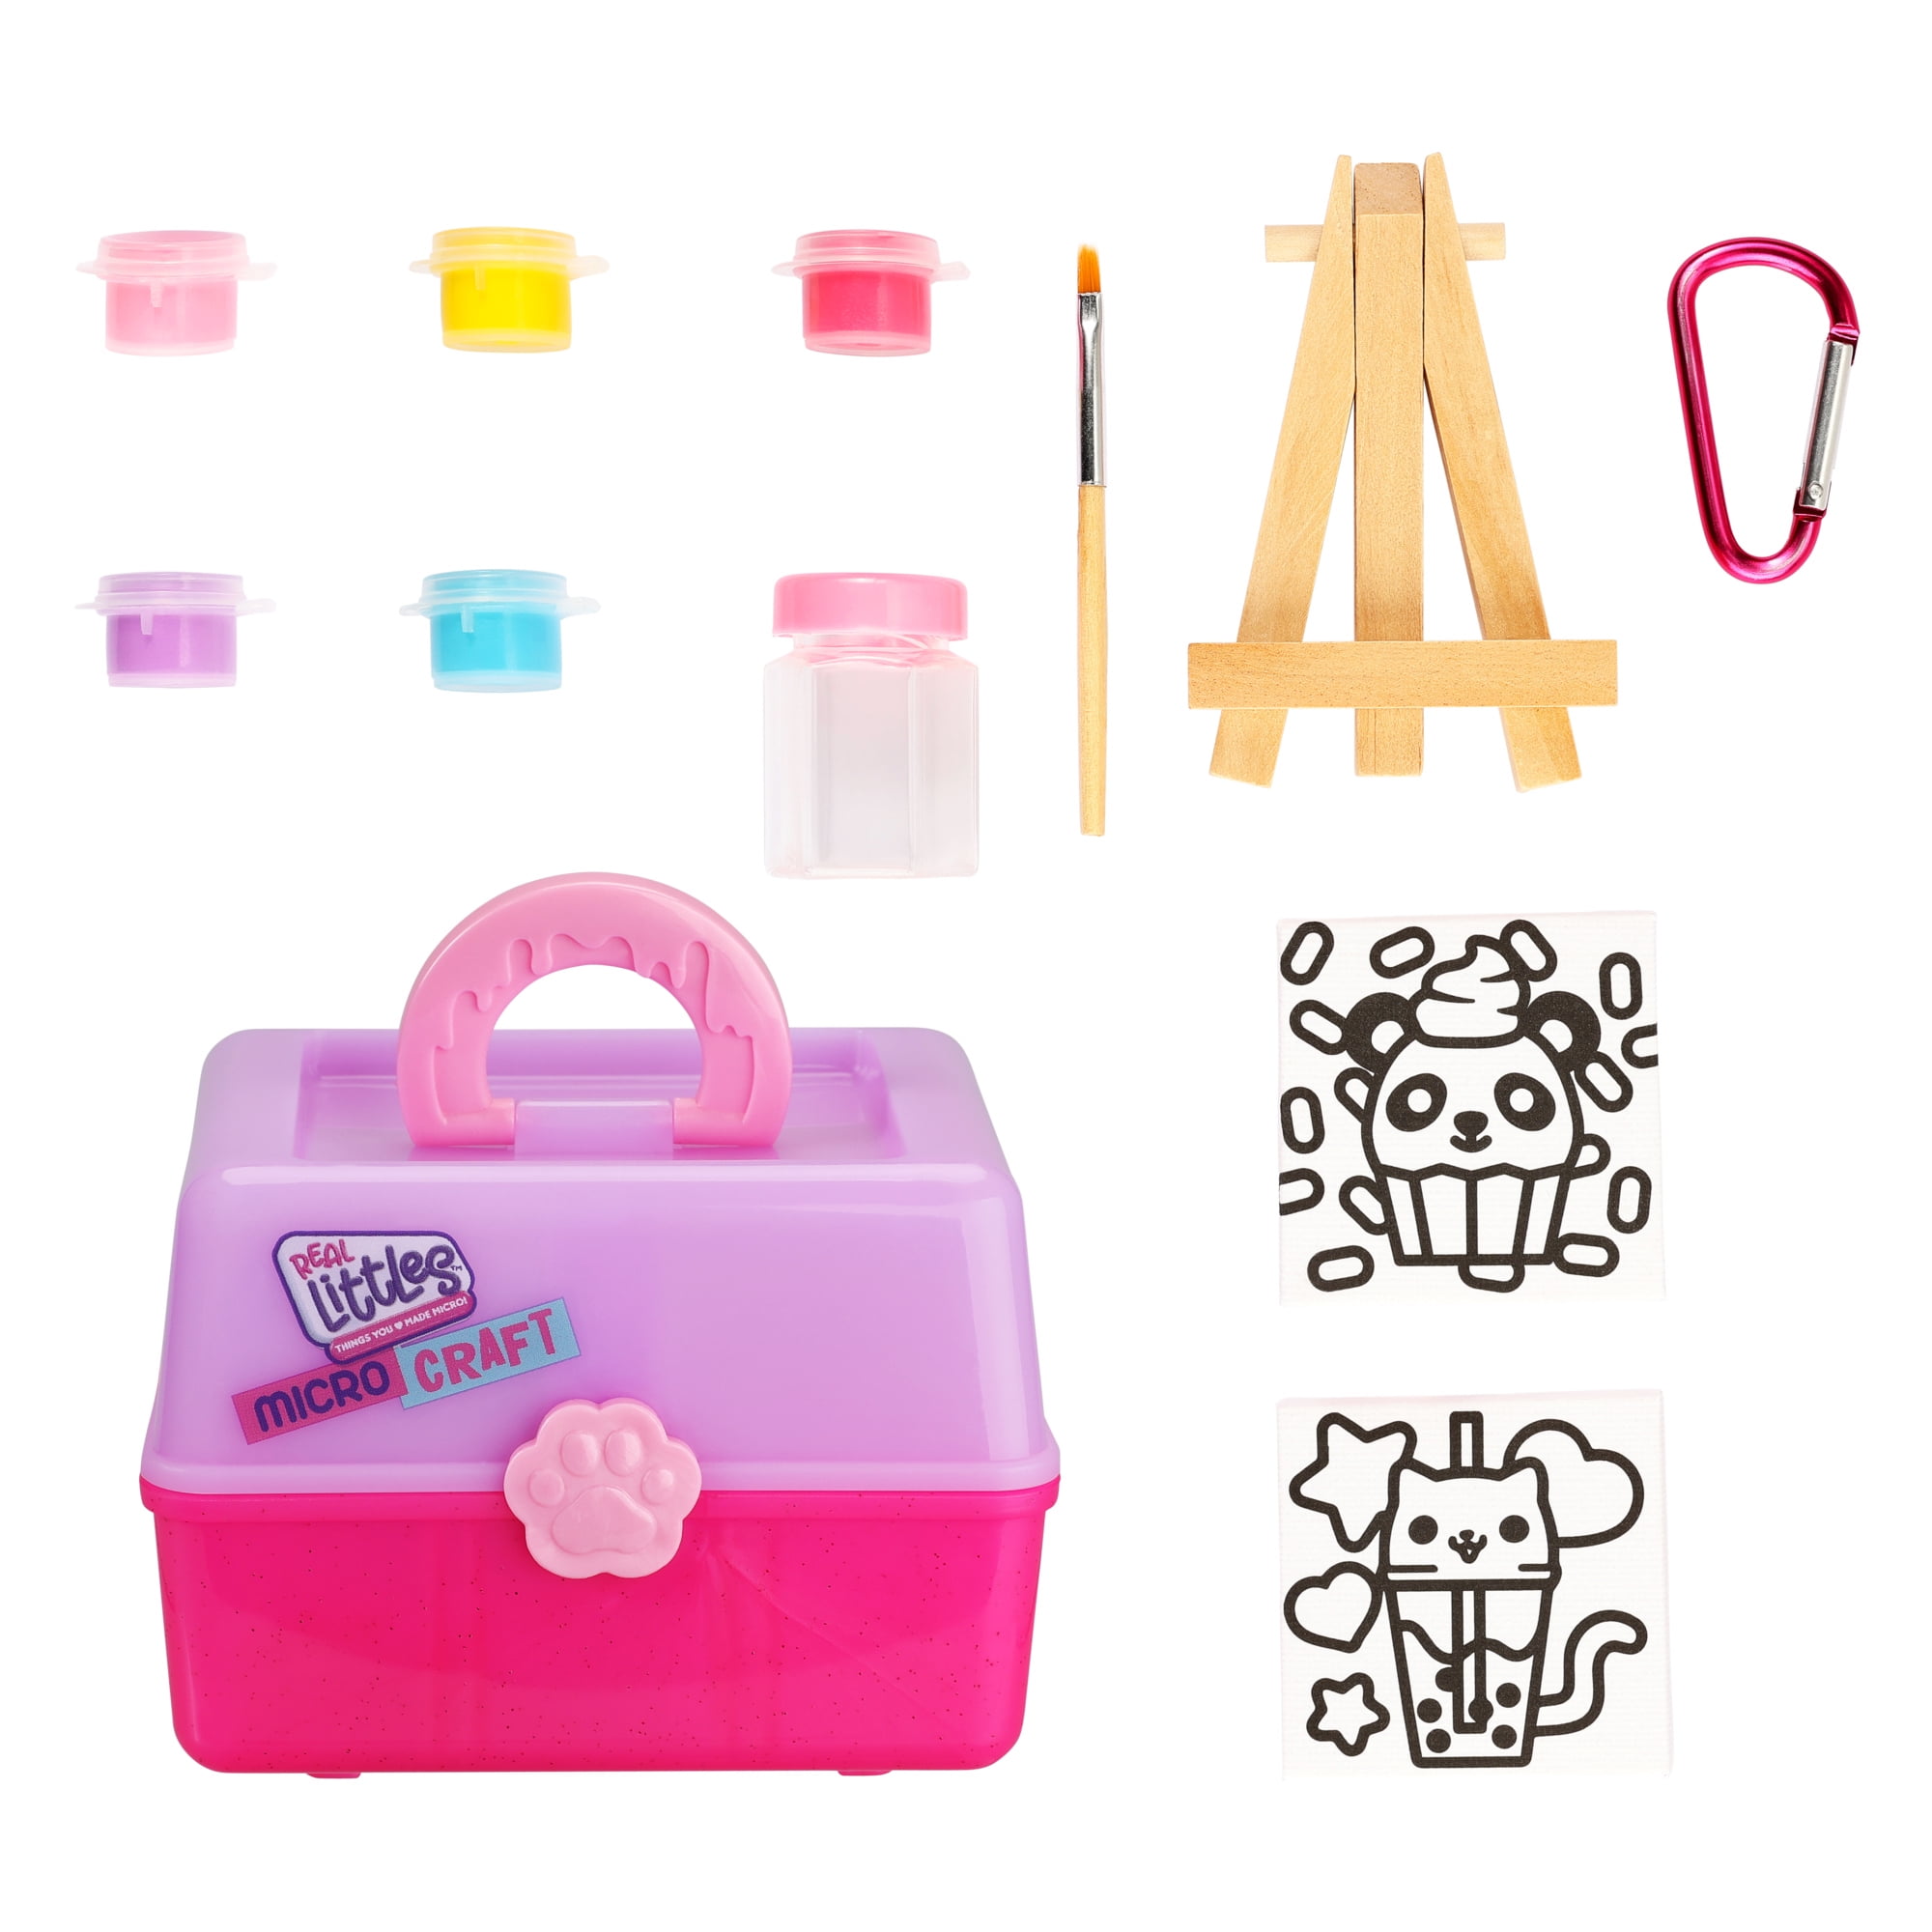 Real Littles Collectible Micro Craft, Mini Craft Box Girls, Ages 6+